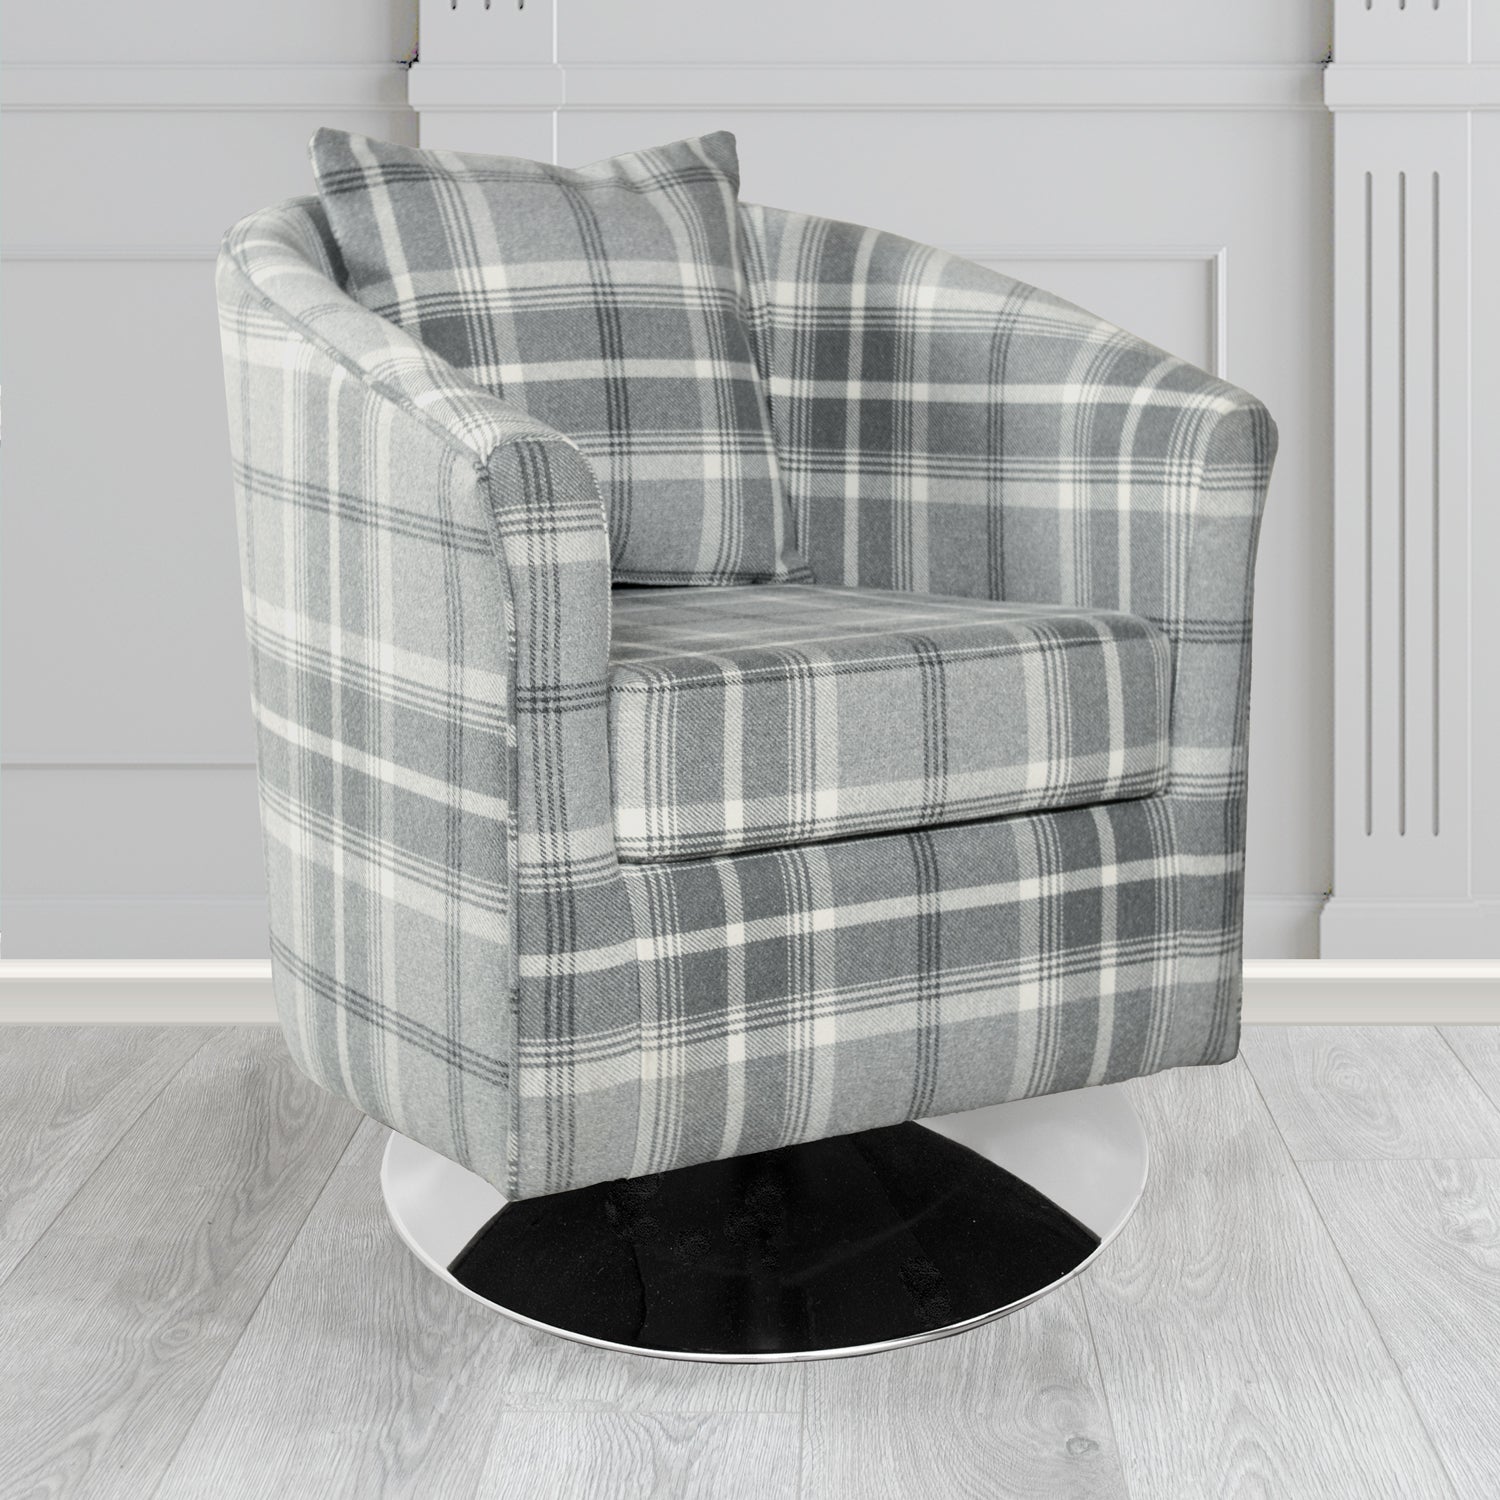 St Tropez Balmoral Dove Grey Check Tartan Fabric Swivel Tub Chair with Scatter Cushion (6627071164458)